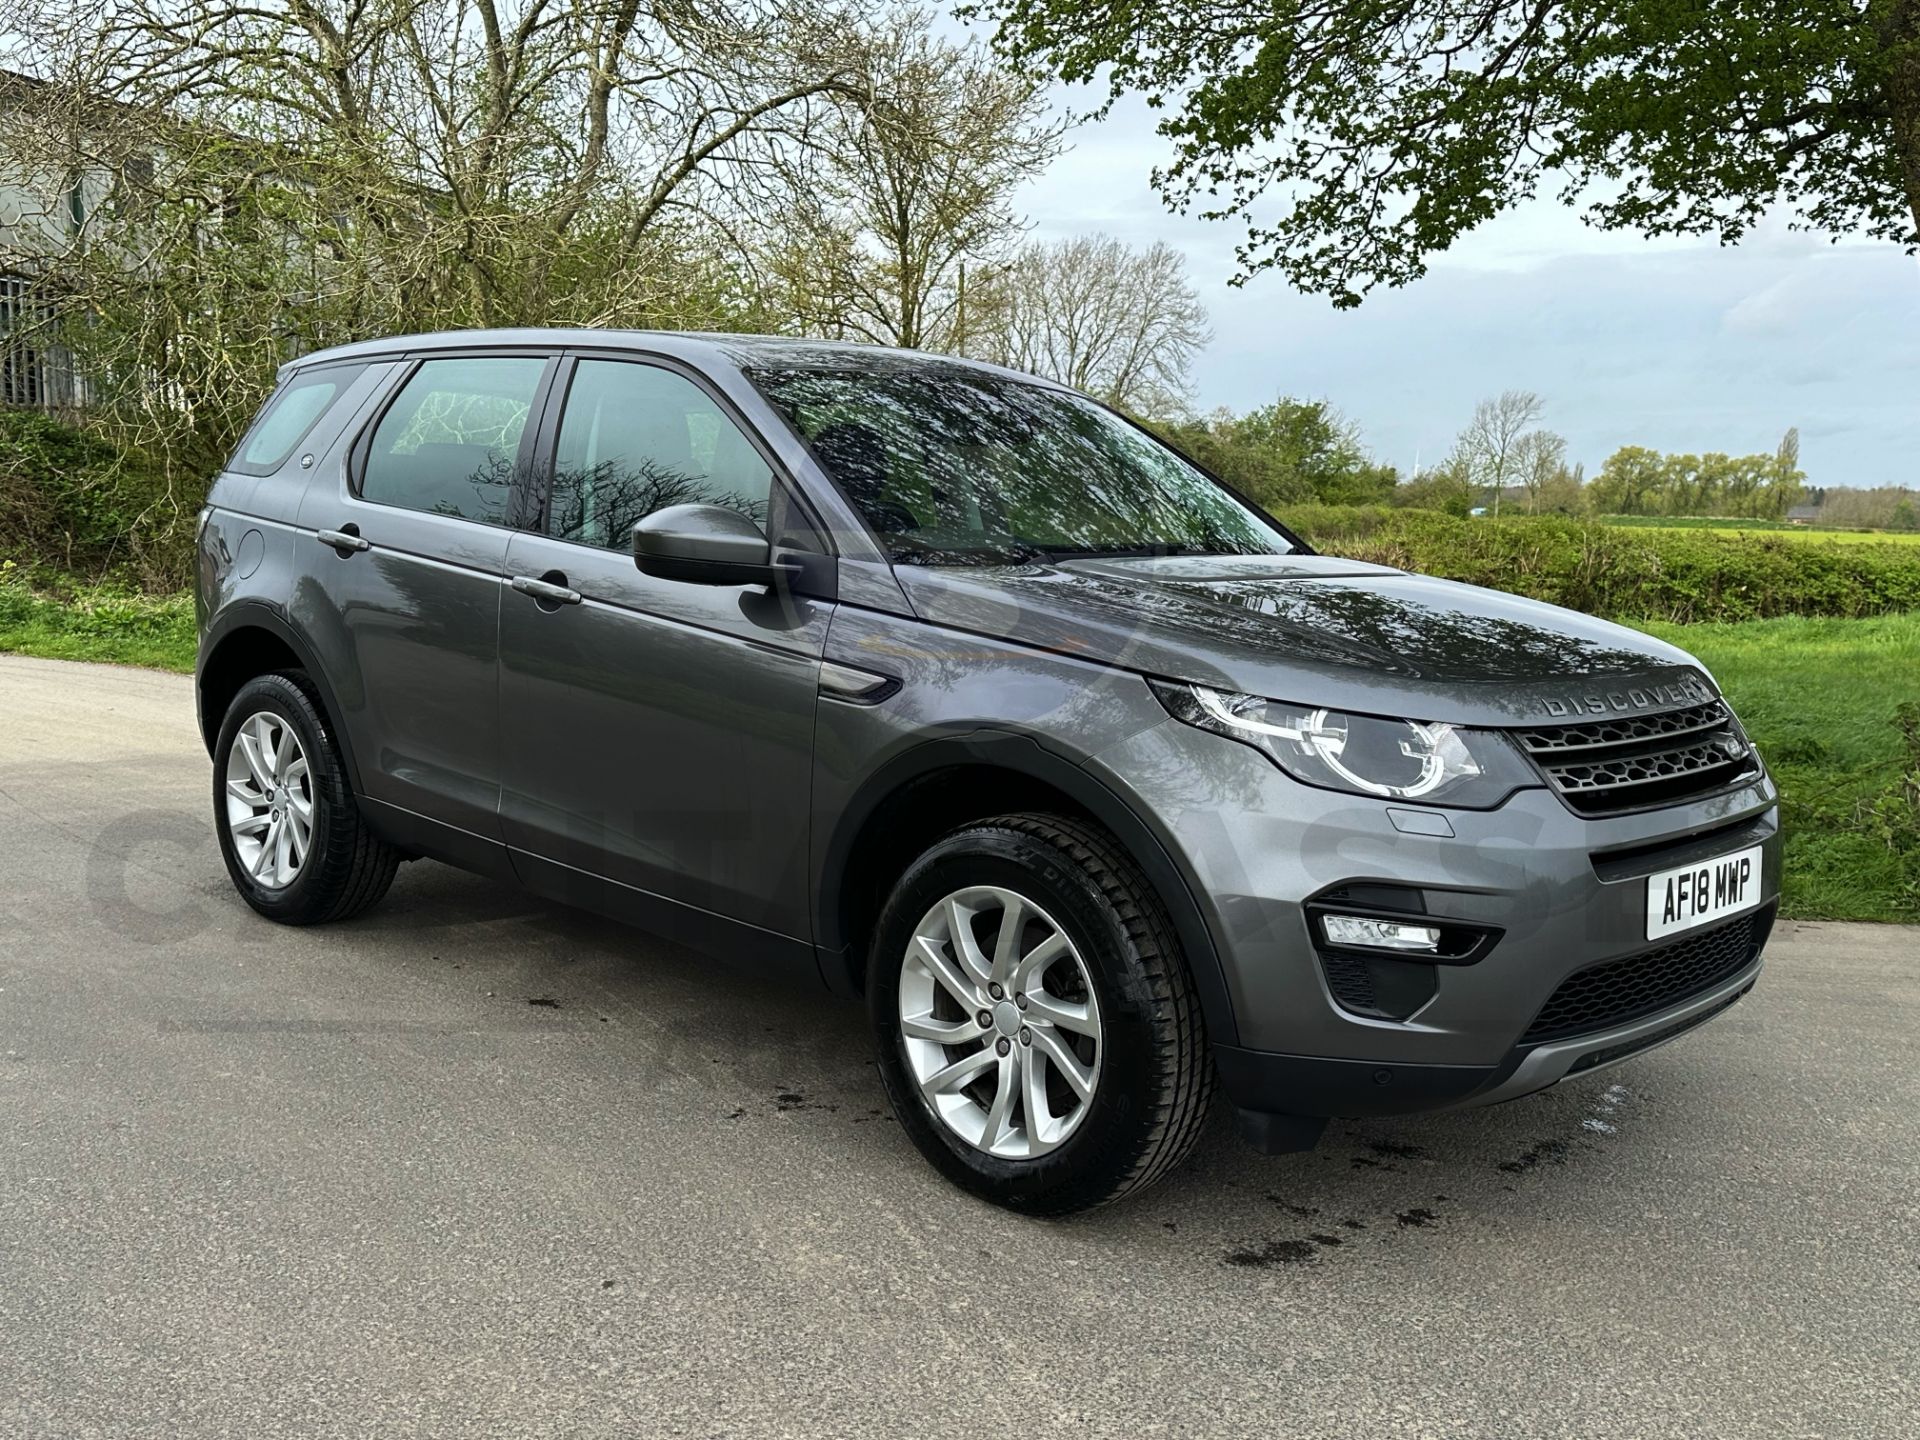 (On Sale) LAND ROVER DISCOVERY SPORT *SE TECH* 5 DOOR SUV (2018 - EURO 6) 2.0 TD4 - AUTO *HUGE SPEC* - Image 3 of 51